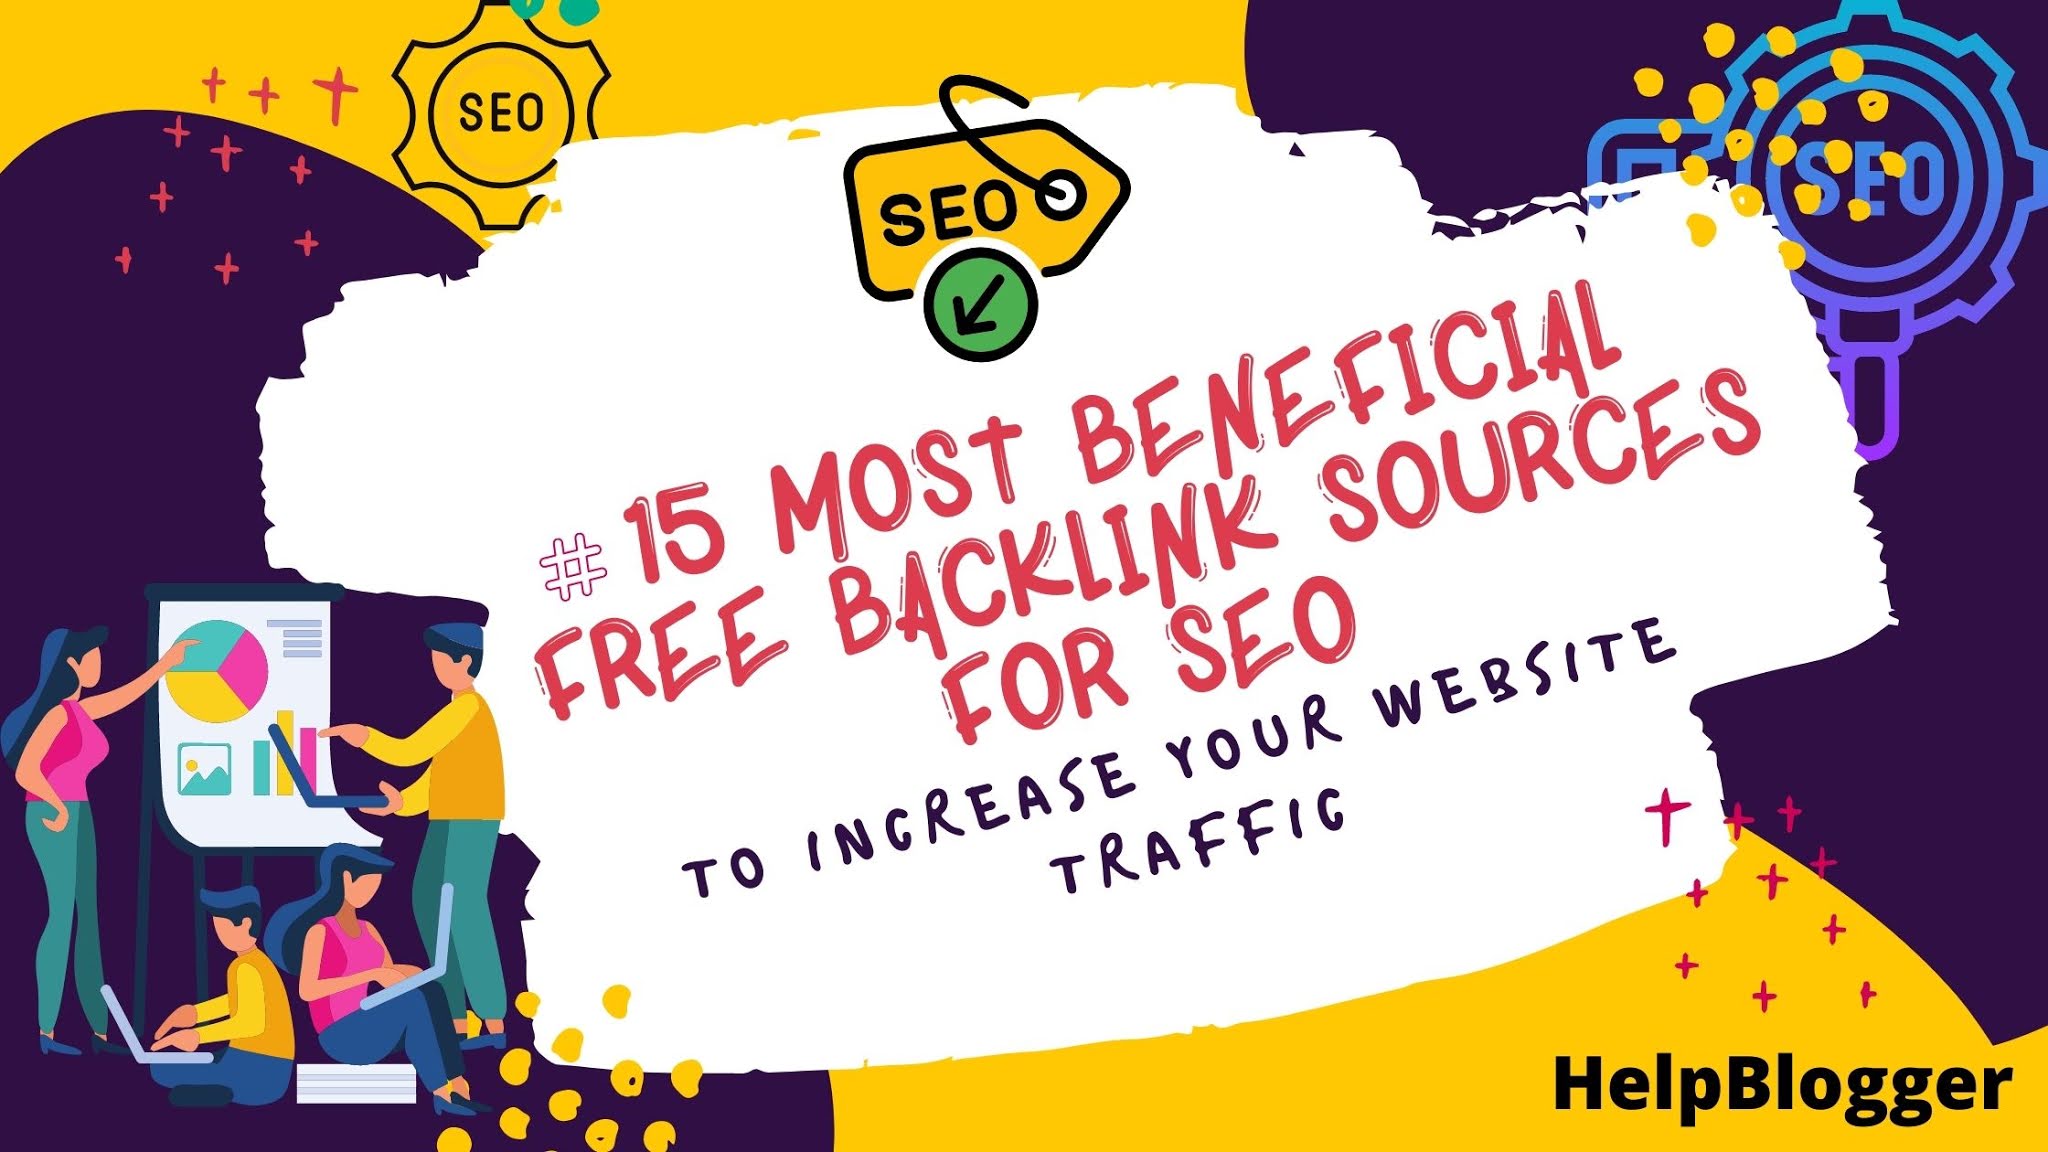 15 Most Beneficial Free Backlink Sources for SEO to Increase Your Website Traffic.